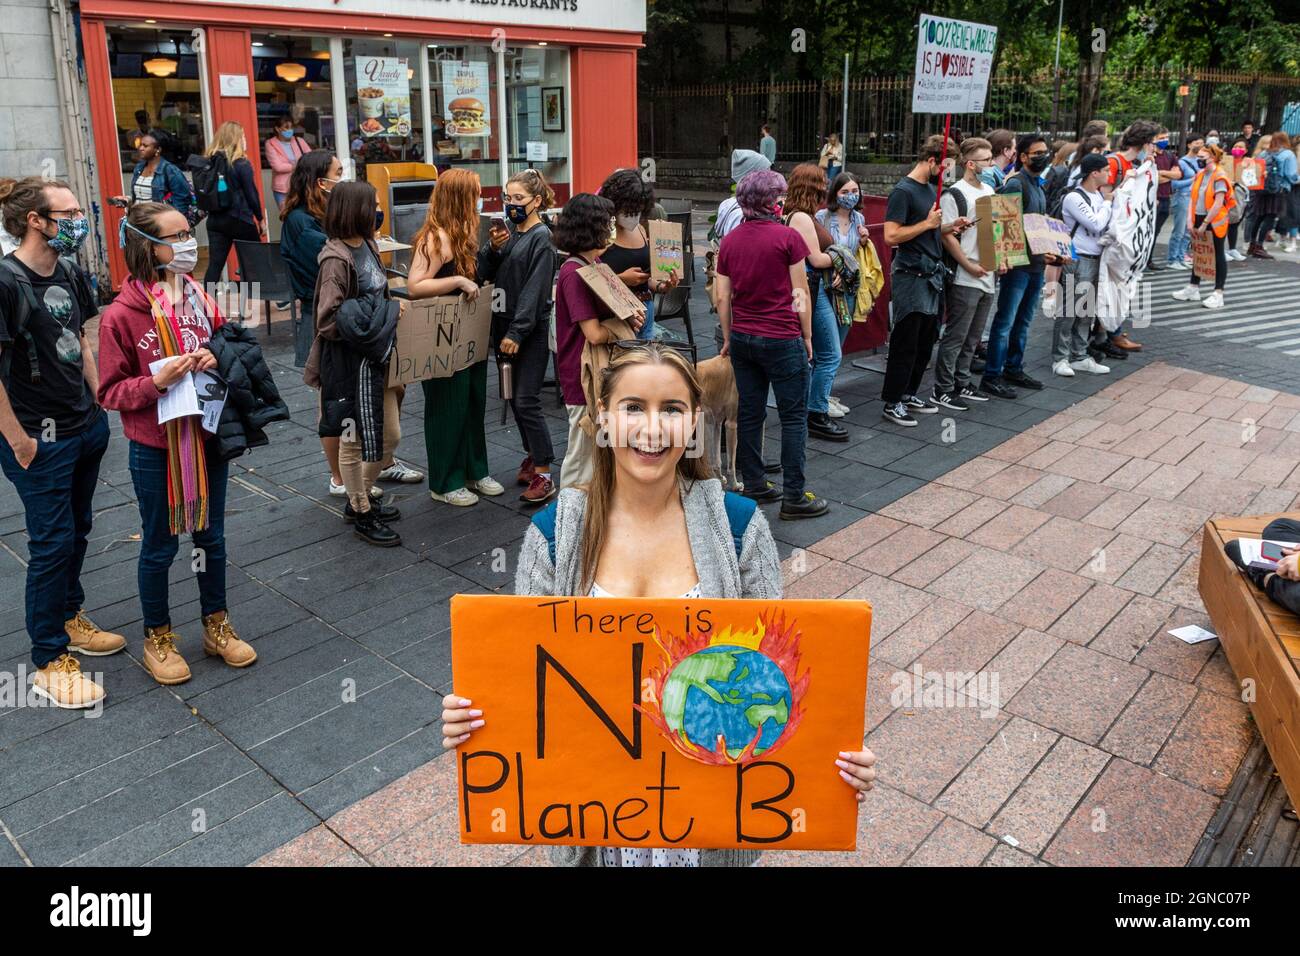 Cork, Ireland. 24th Sep, 2021. Fridays for Future held a global climate strike on Grand Parade in Cork city today, demanding climate justice within Ireland and around the world. At the protest was Alicia Joy O'Sullivan. Credit: AG News/Alamy Live News Stock Photo